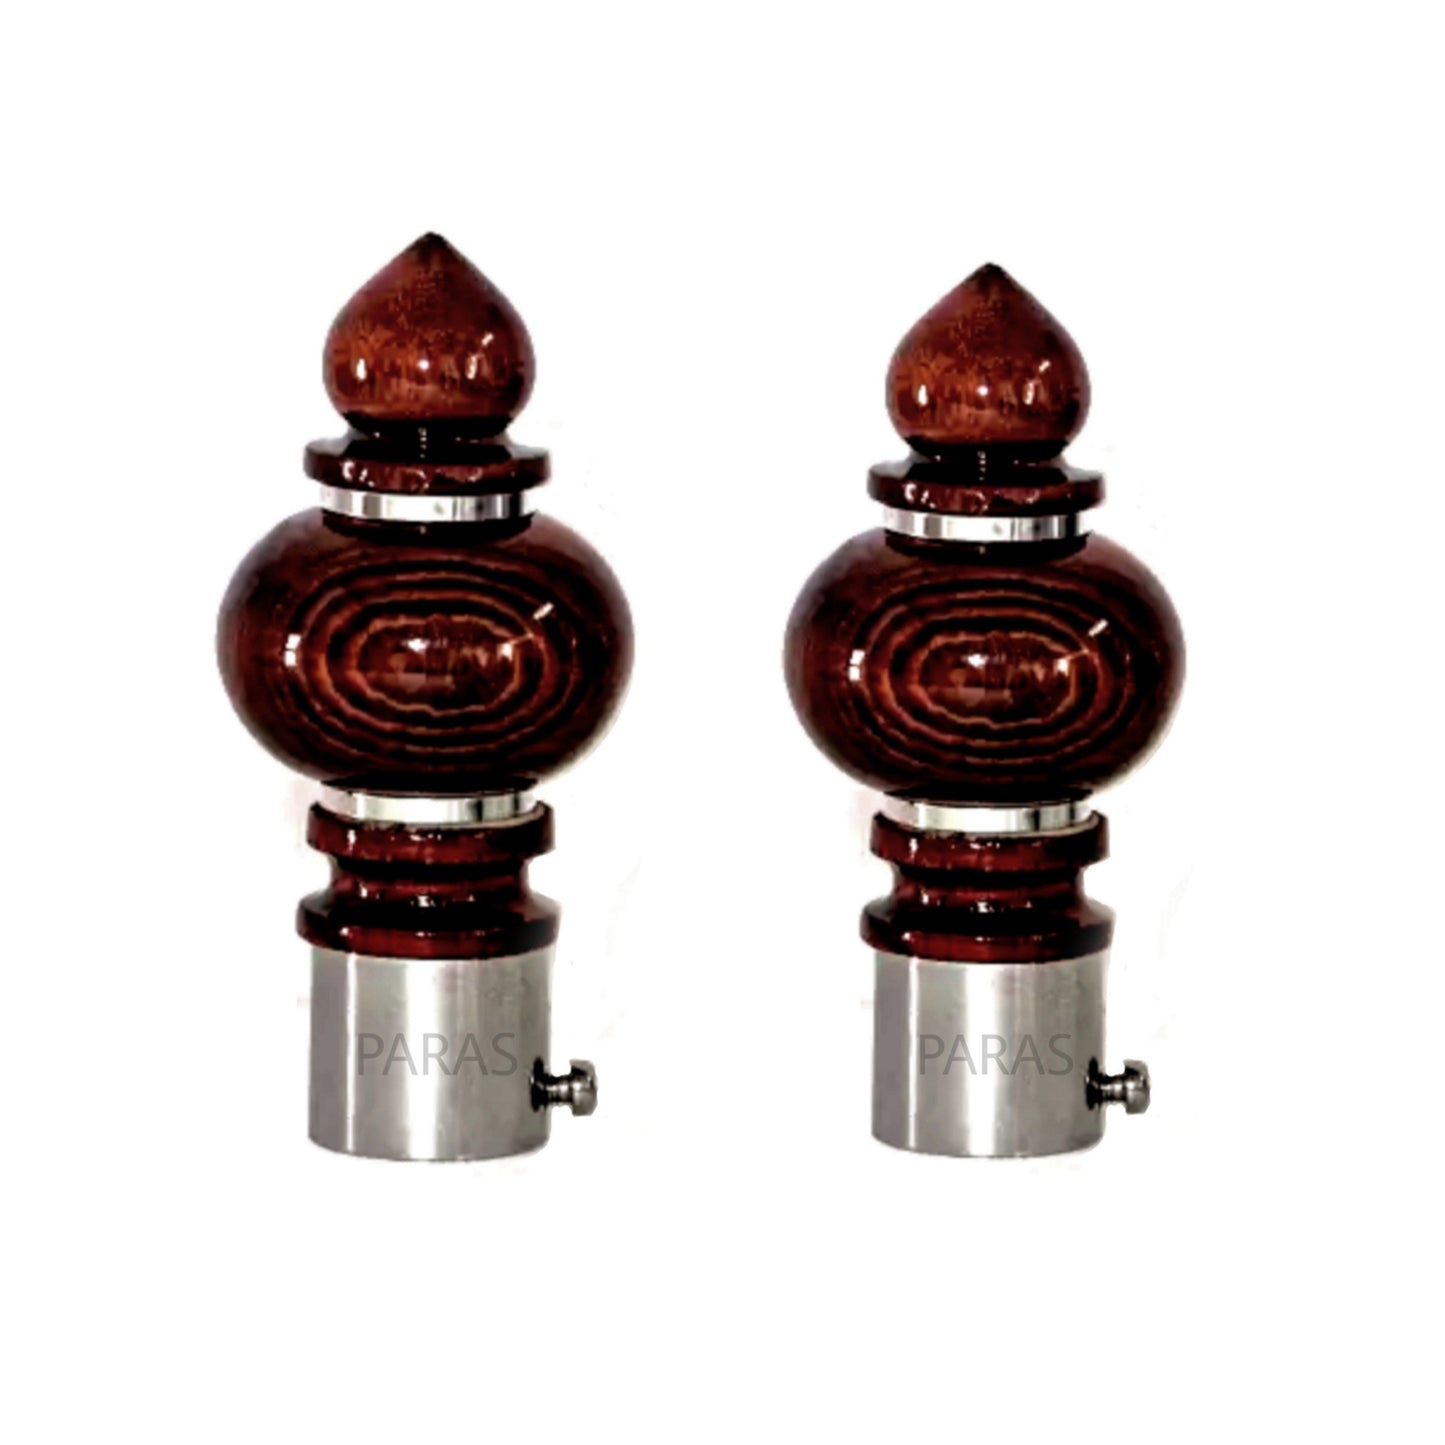 Buy Paras Wooden Stainless Steel Curtain Finials Only